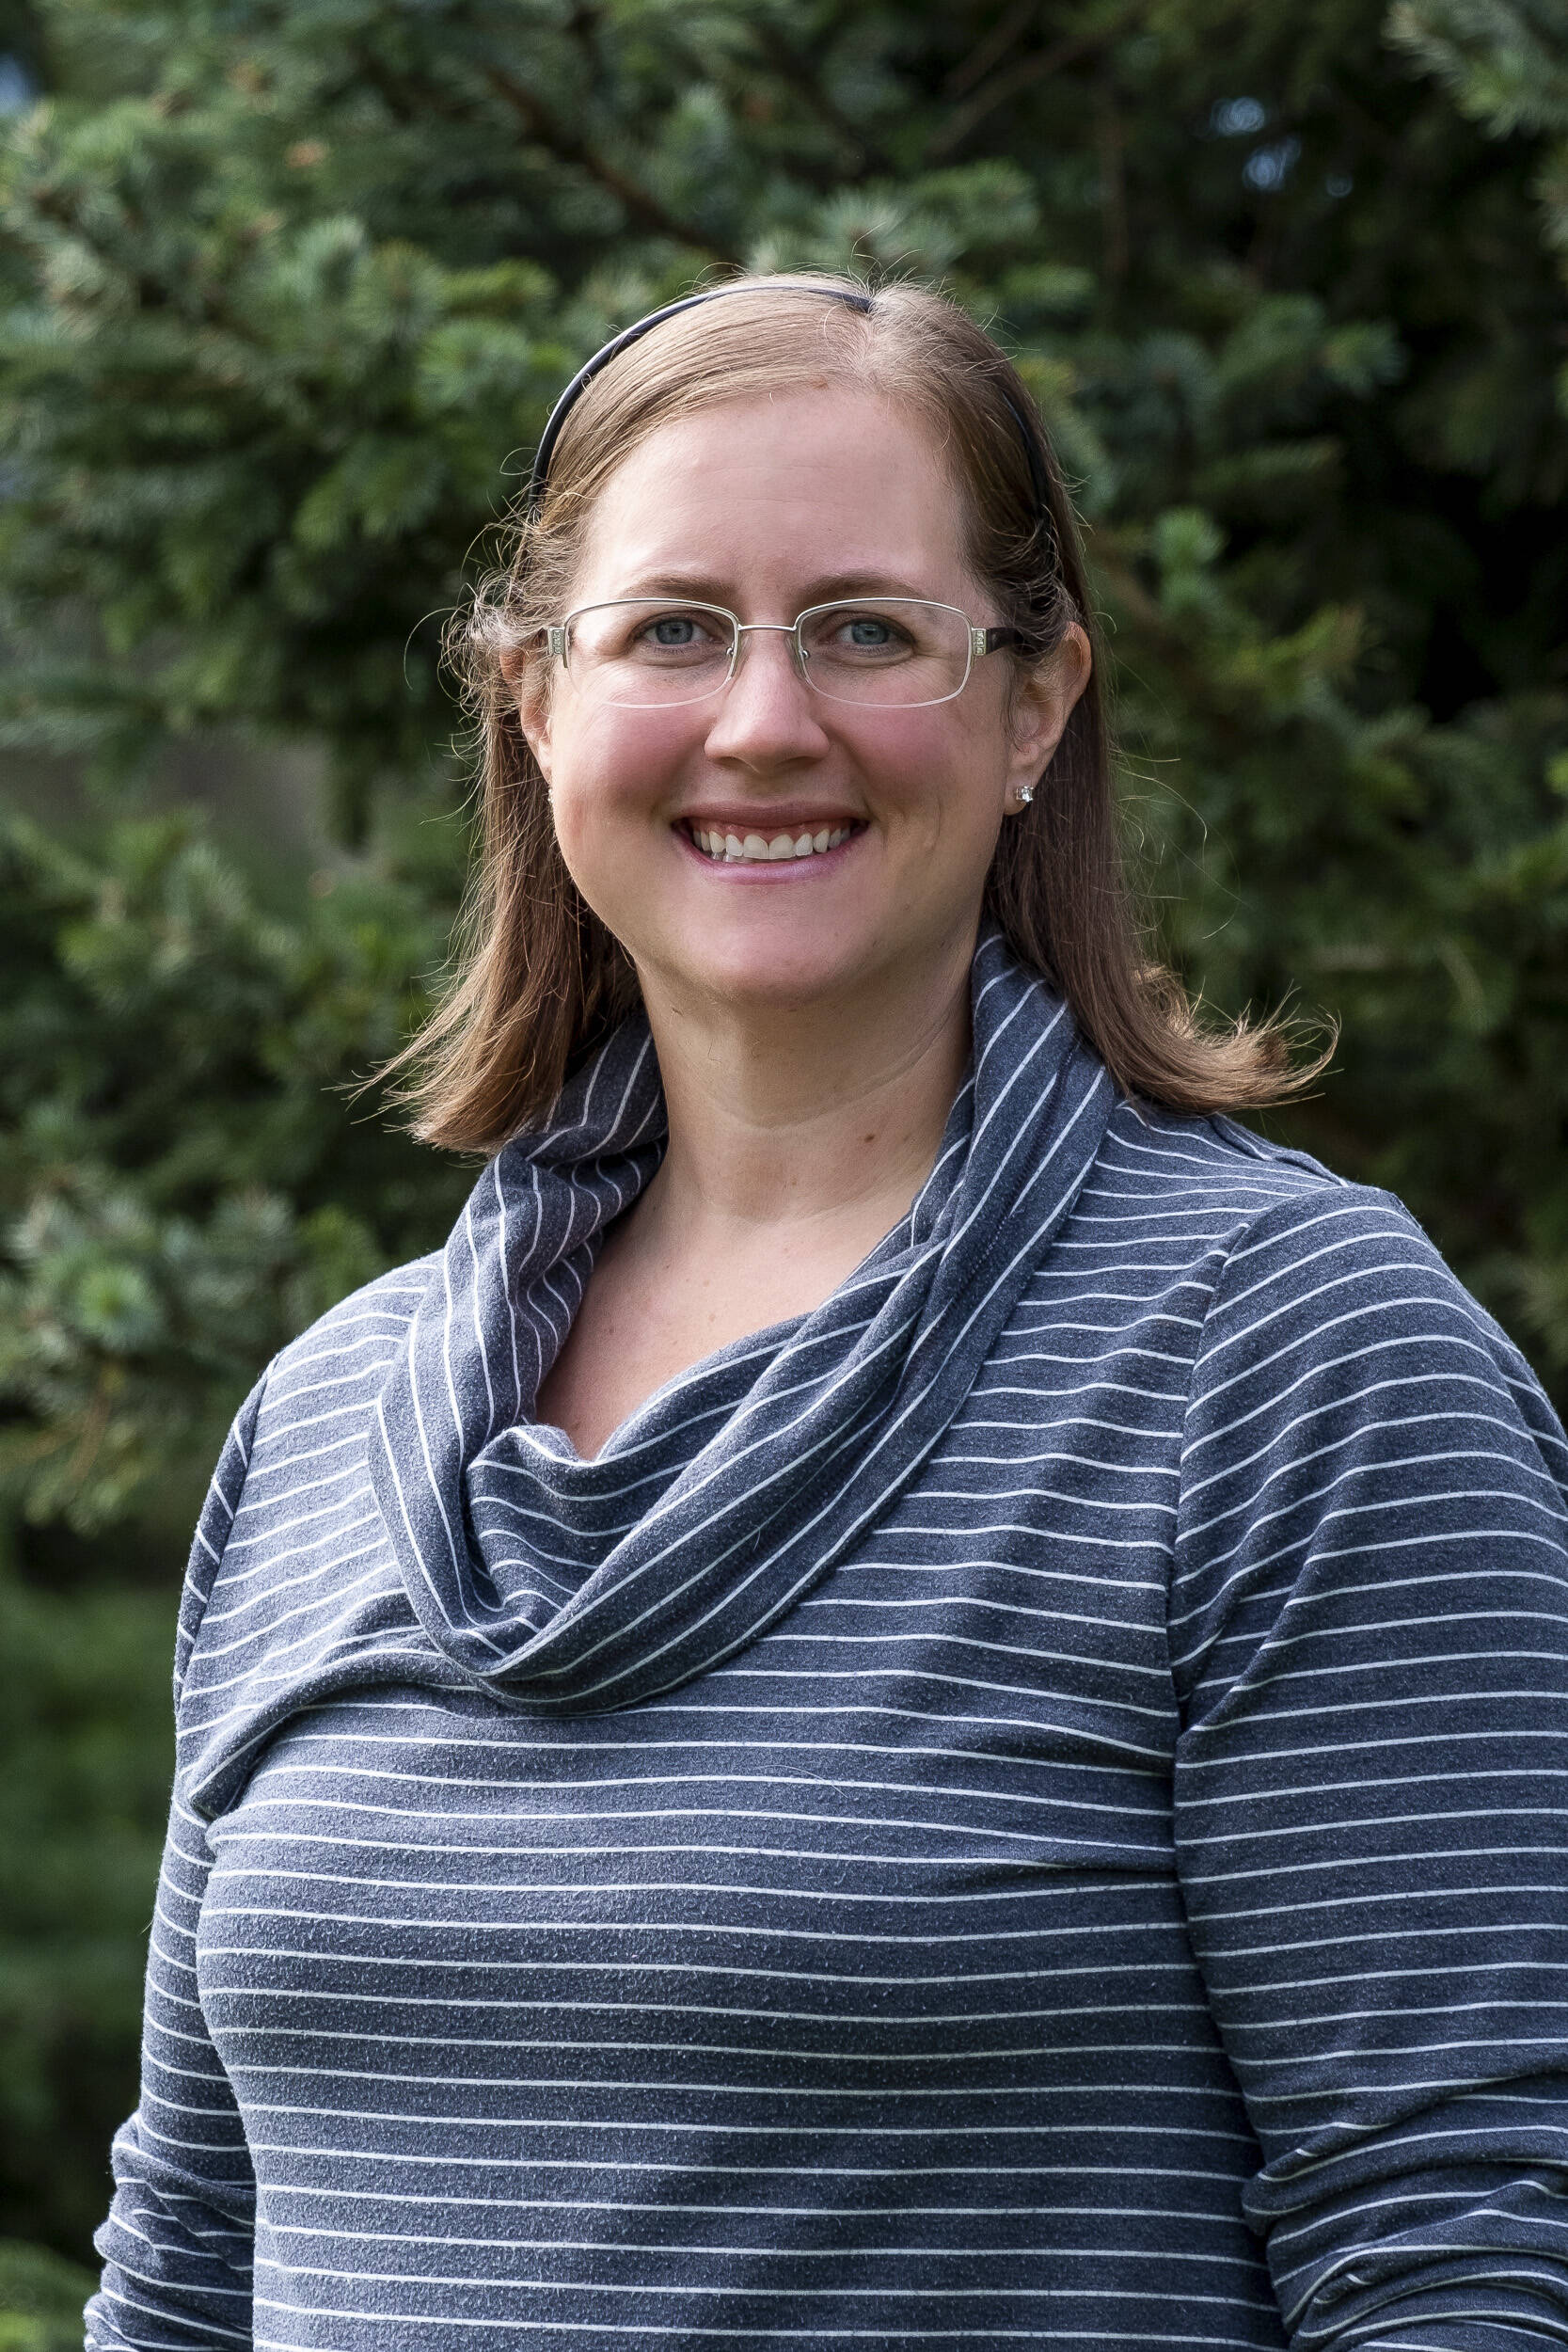 Dr. Sarah Roberts has been named a full-time hospitalist at South Peninsula Hospital in Homer, Alaska. Currently a family medicine physician at Homer Medical Clinic, Dr. Roberts moves full time to the hospital on Oct. 1. (Photo provided/South Peninsula Hospital)